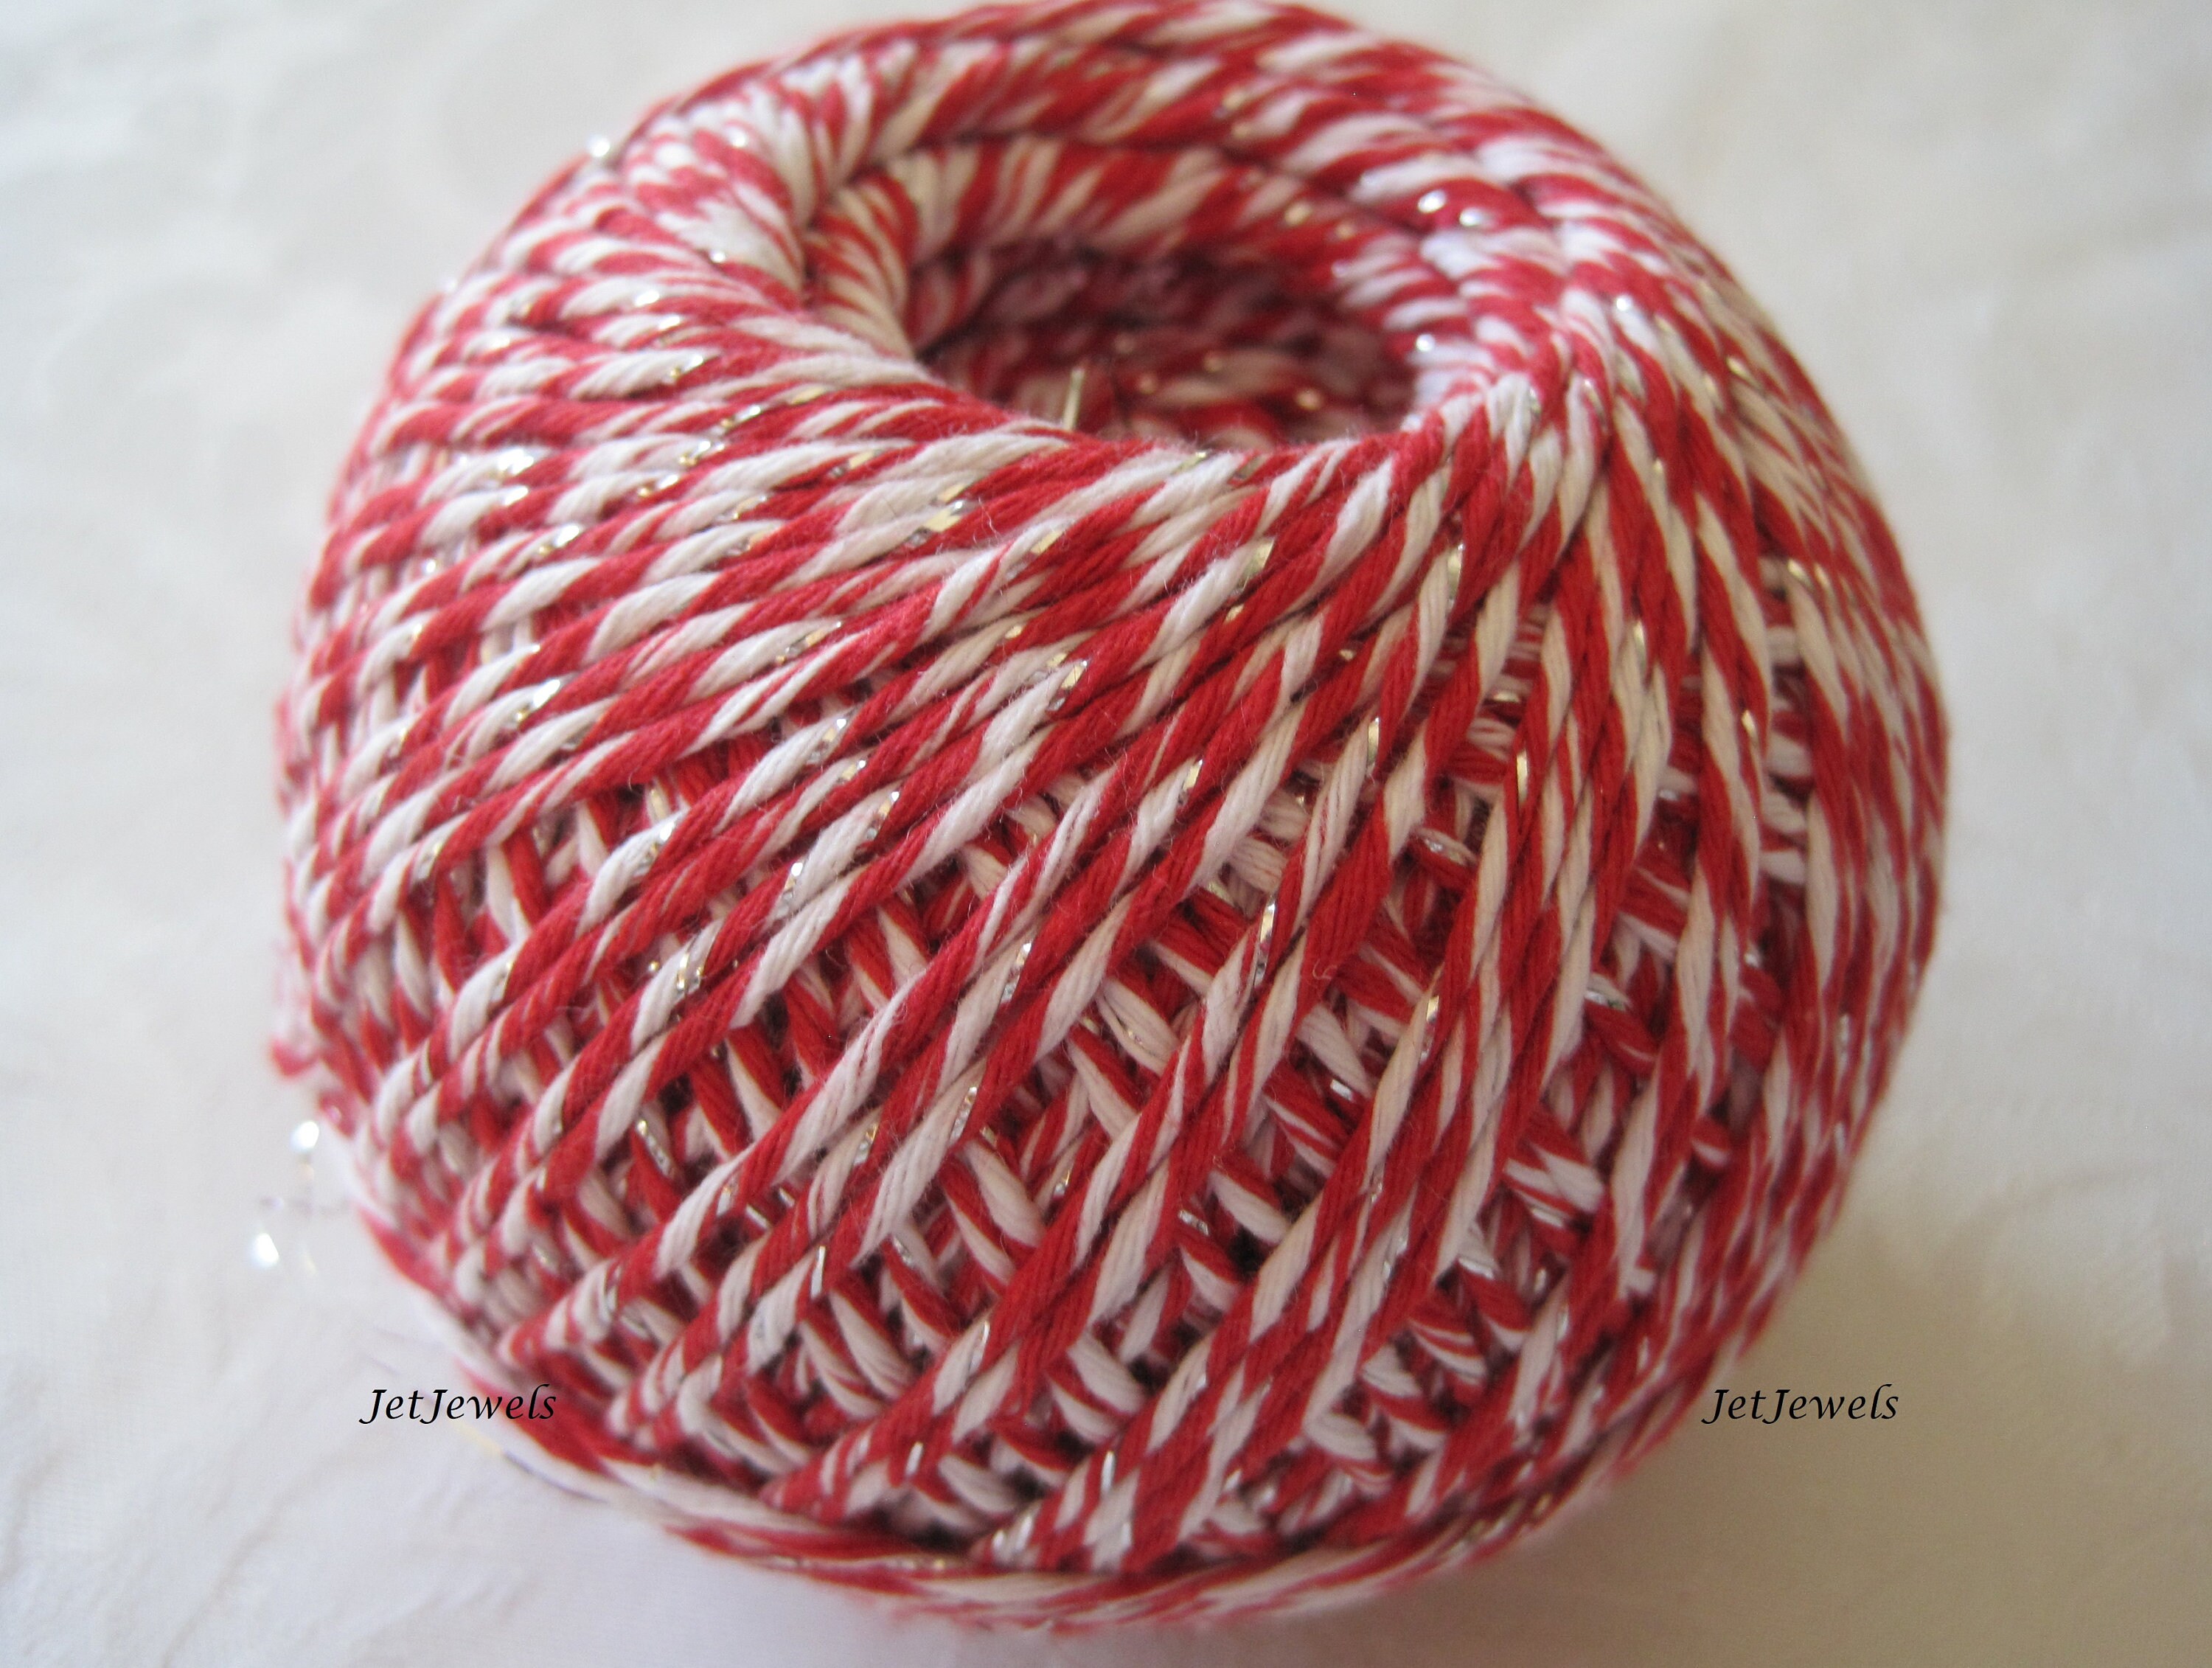 Red/white Baker's Twine 10 Yards, 2 Ply Cotton Twine 